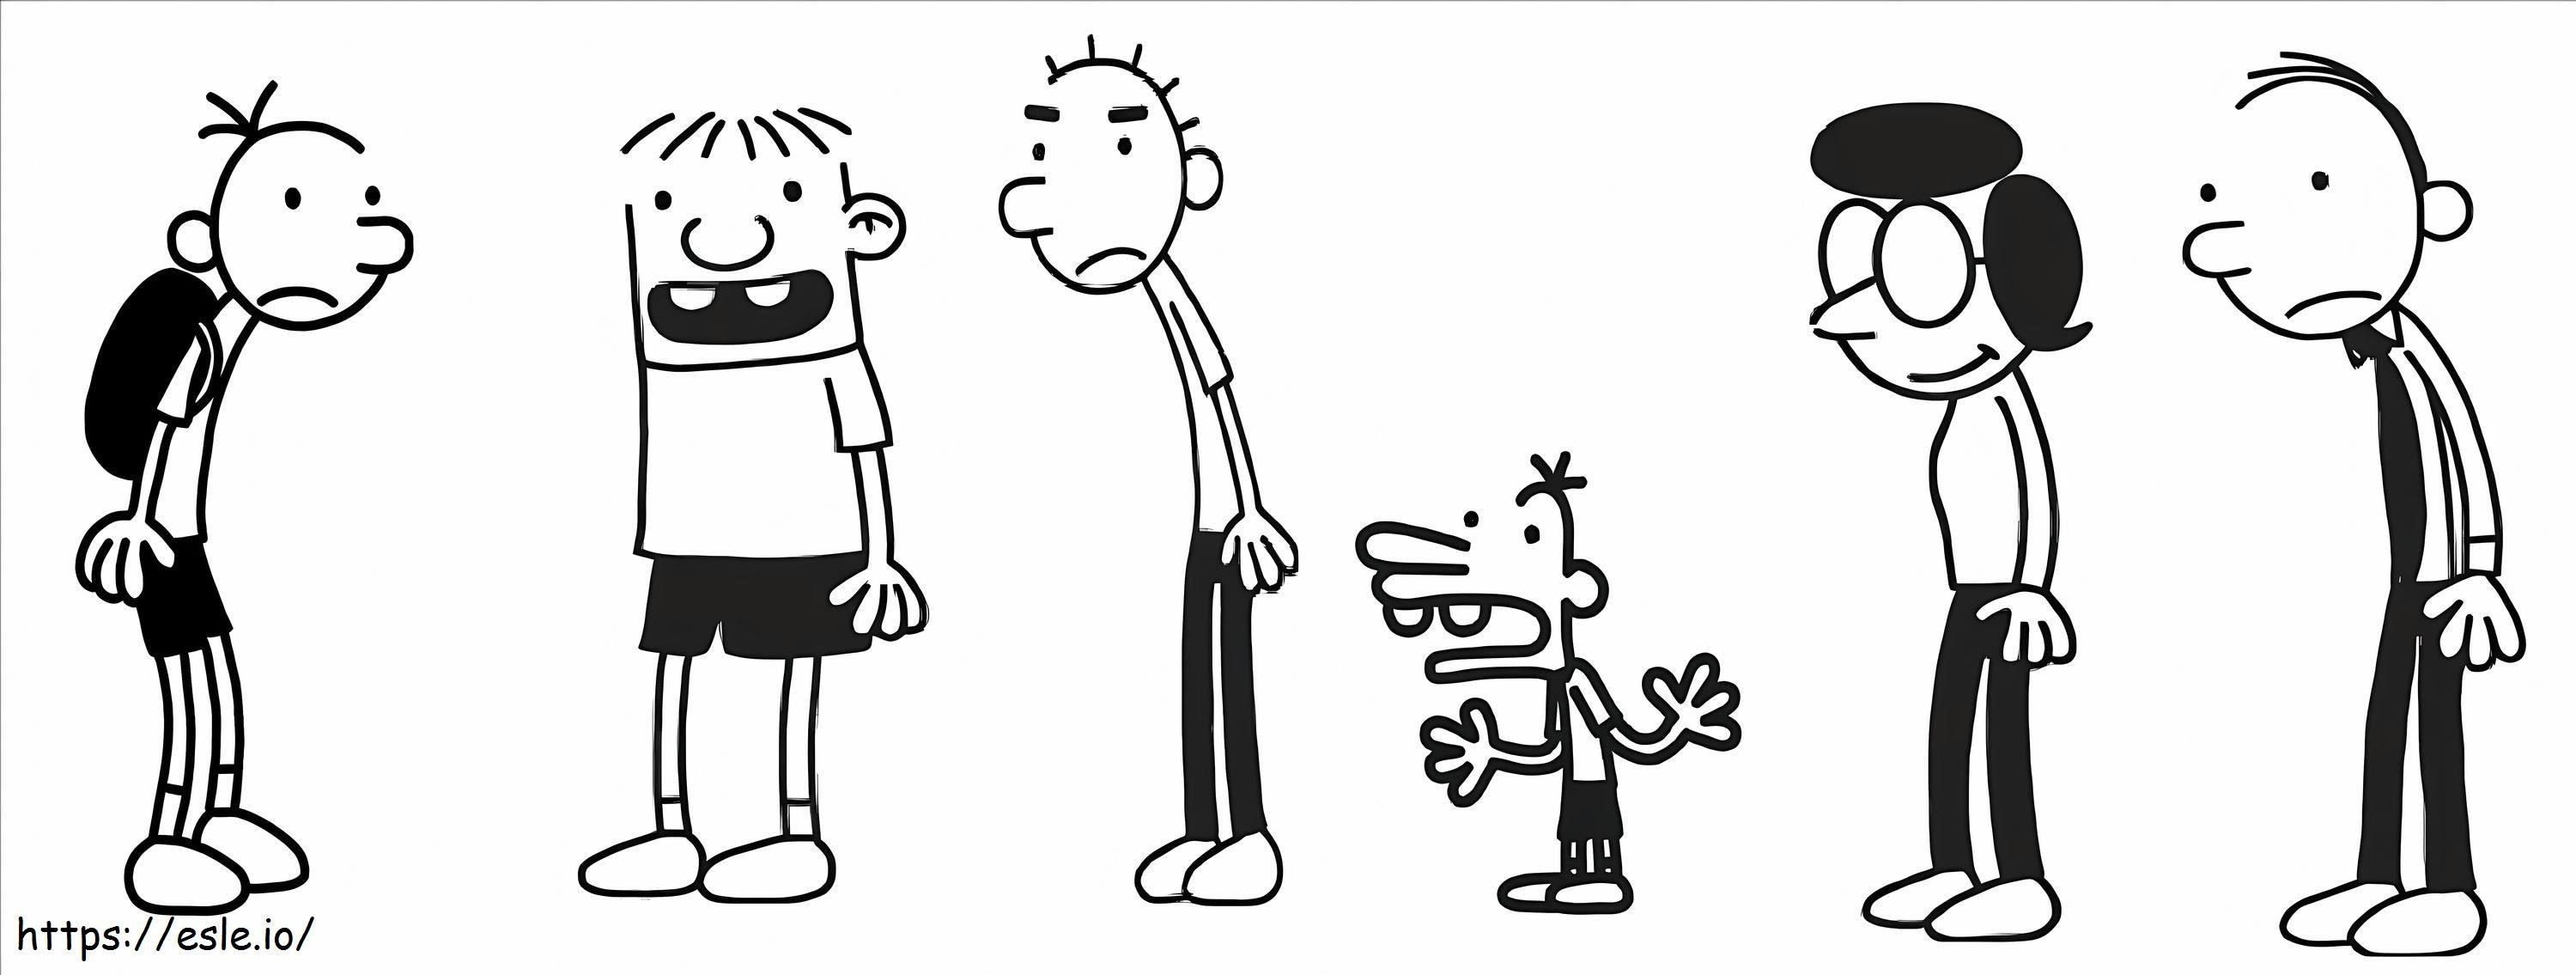 Wimpy Kid And Friend coloring page